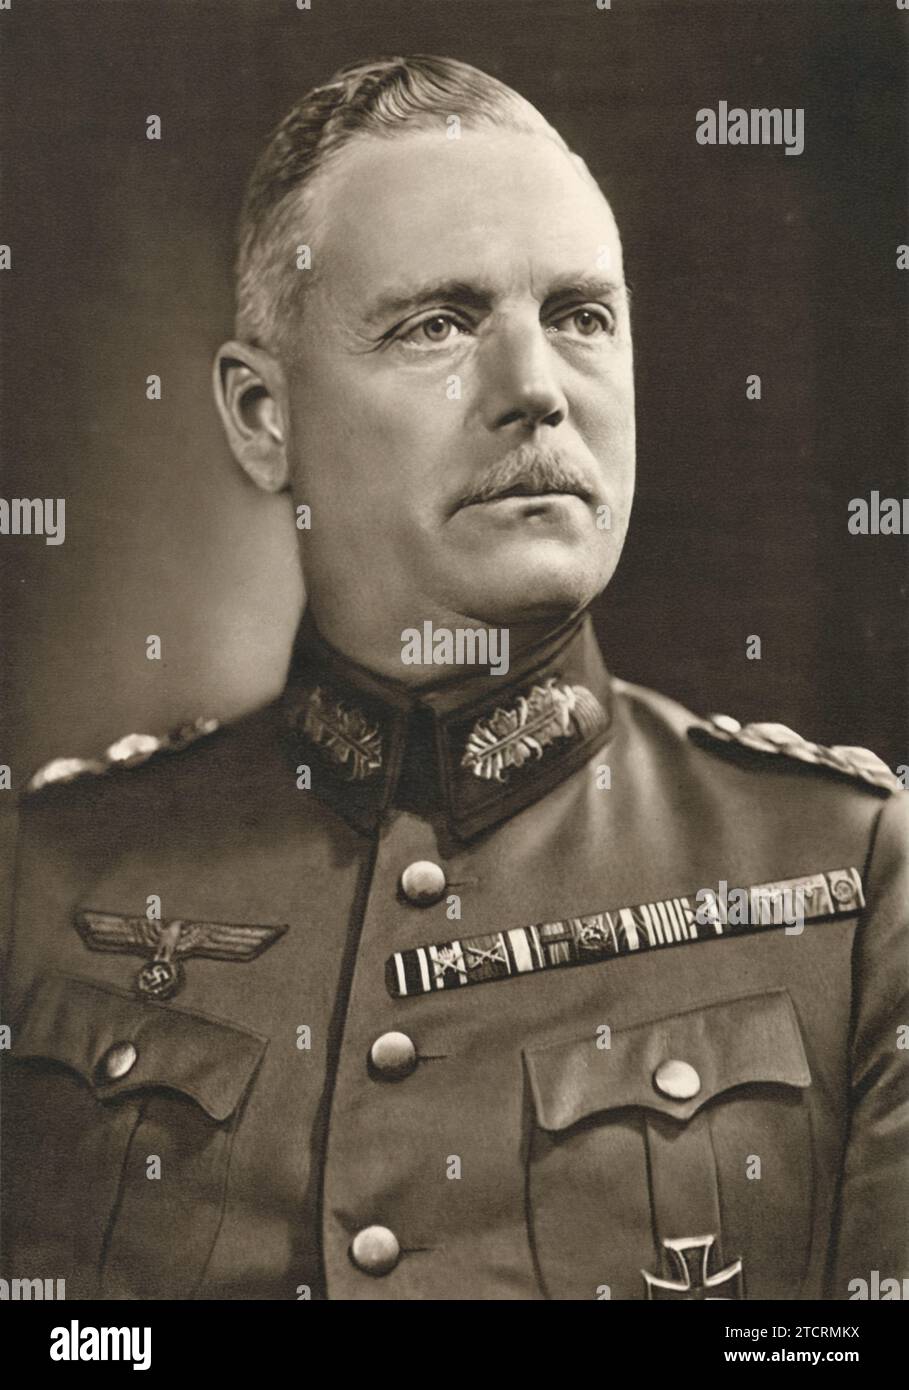 Field Marshal Wilhelm Keitel (Born: 22 September 1882 - Died: 16 October 1946), served as Chief of the High Command of the German Armed Forces during World War II. His position placed him at the center of military decision-making, coordinating the operations of the army, navy, and air force. Stock Photo